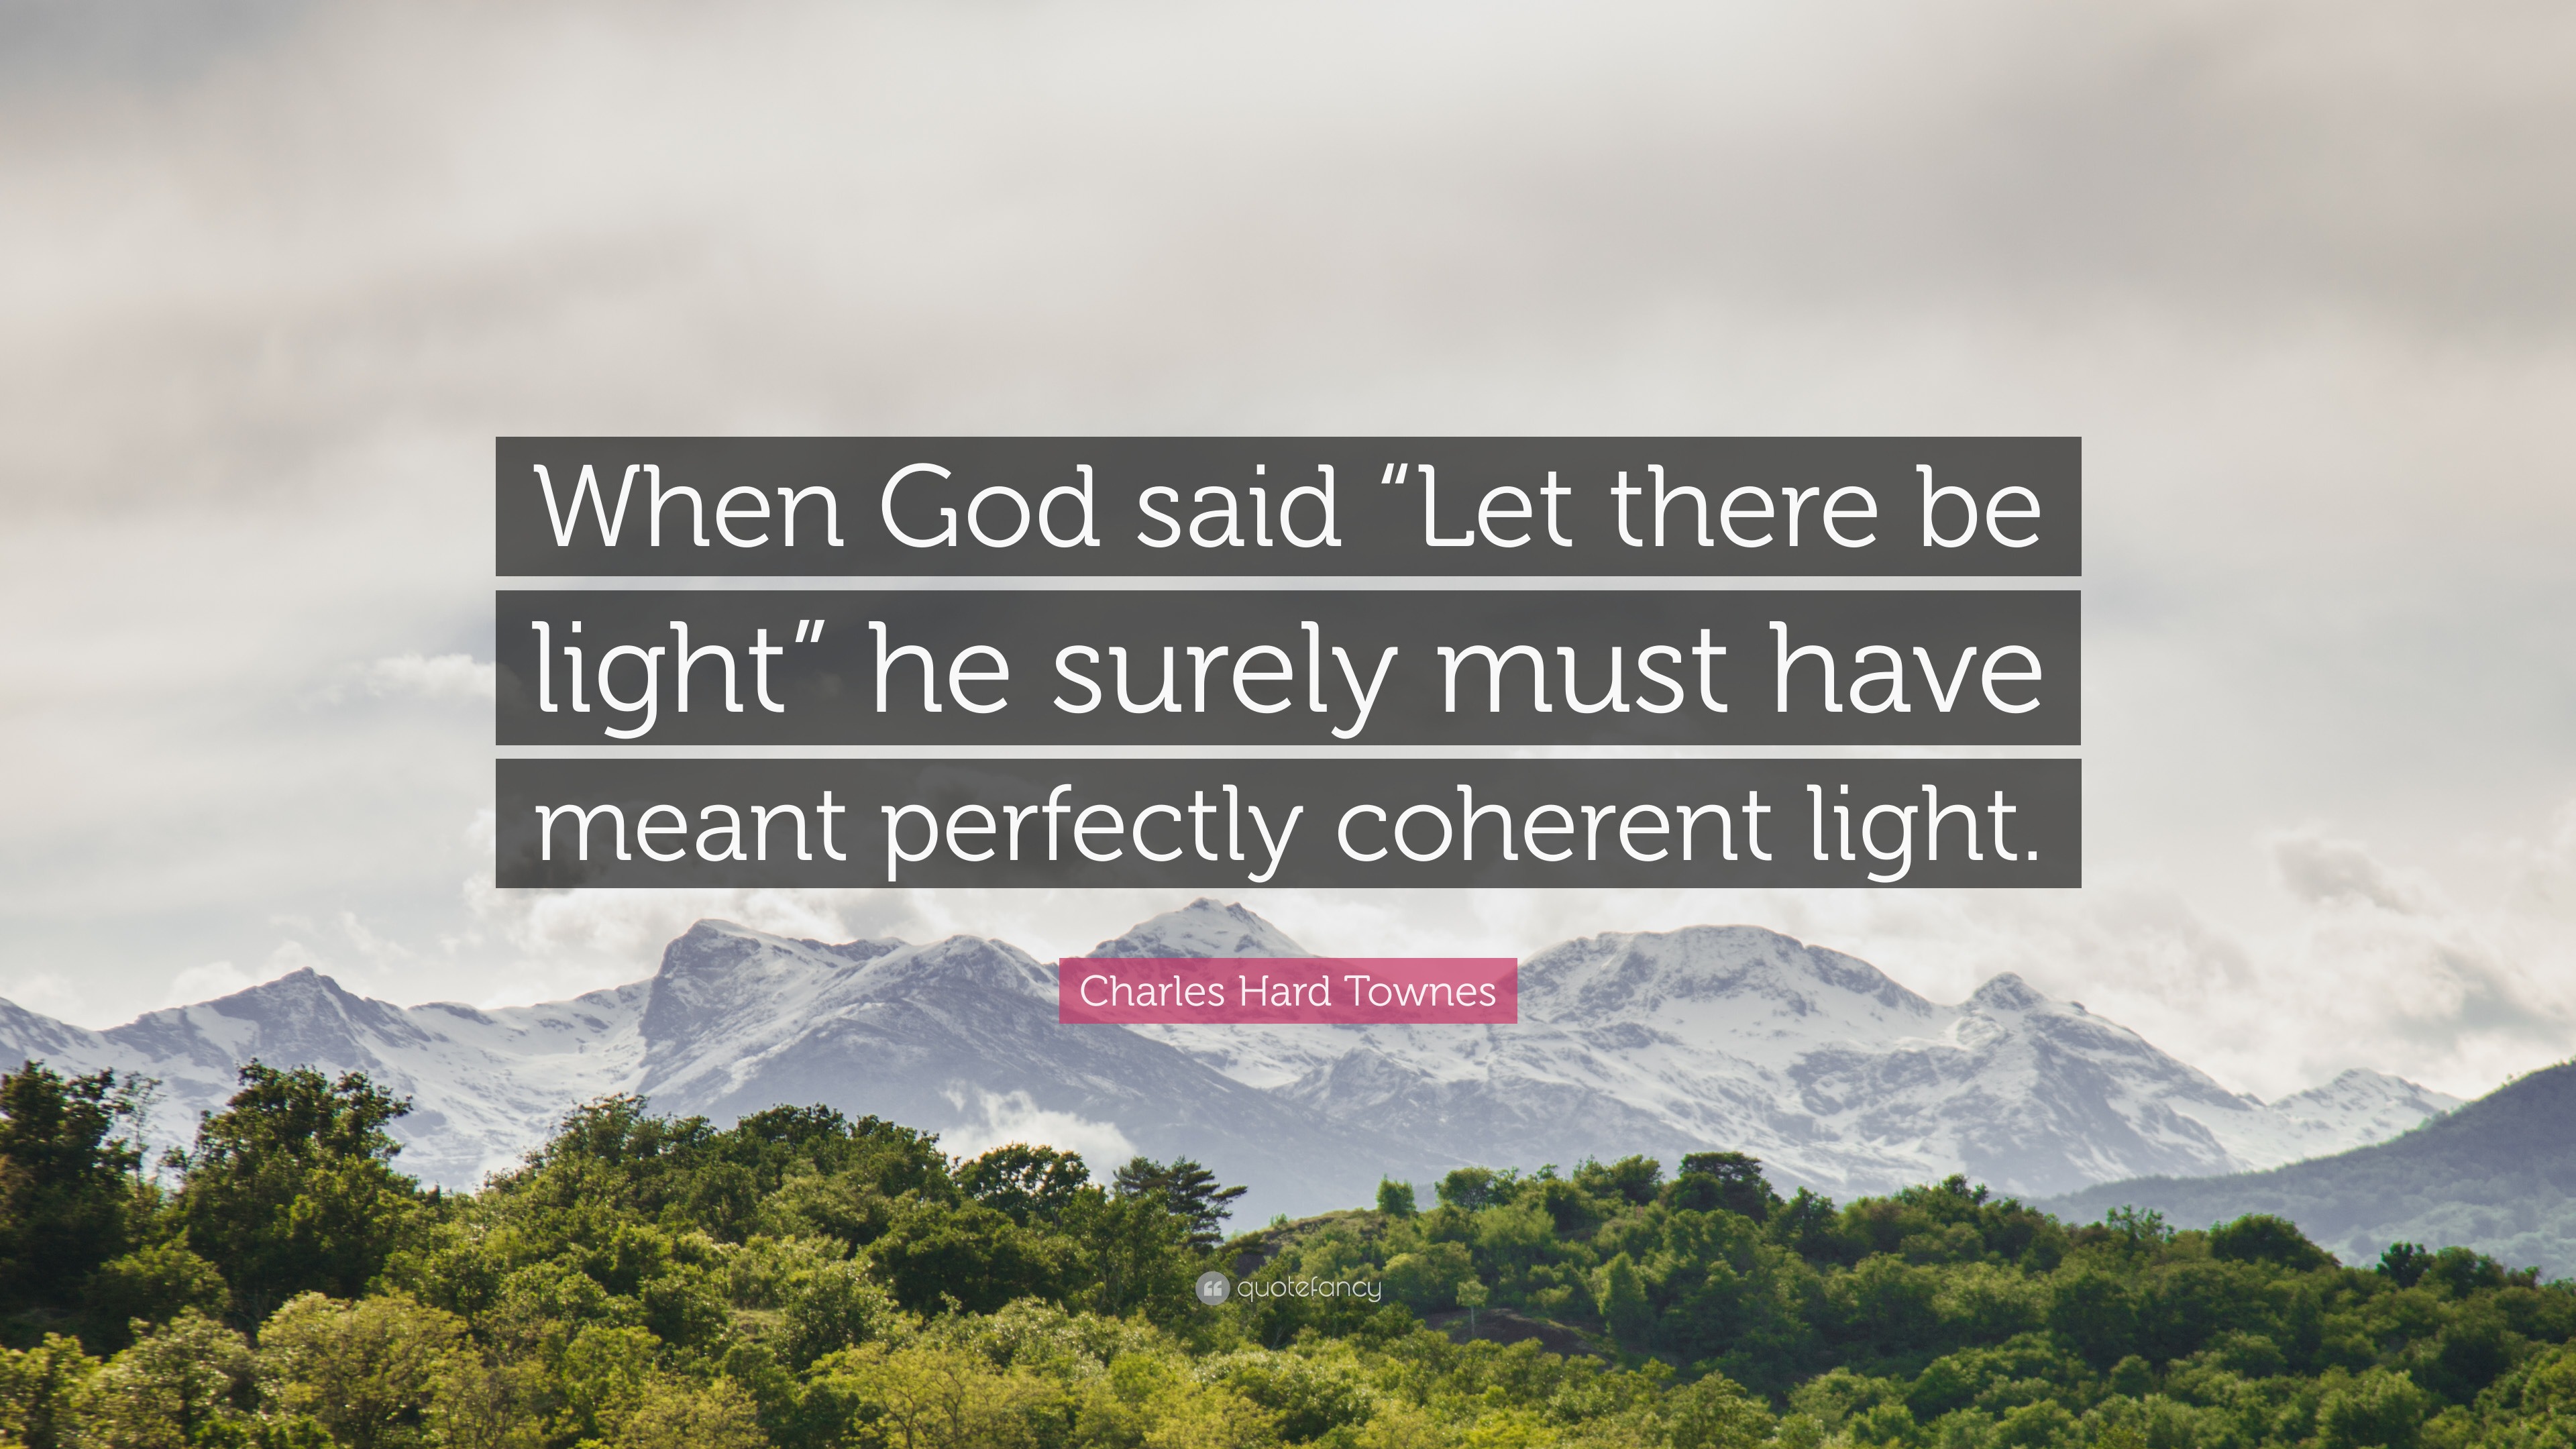 Charles Hard Townes Quote: “When God said “Let there be light” he surely  must have meant